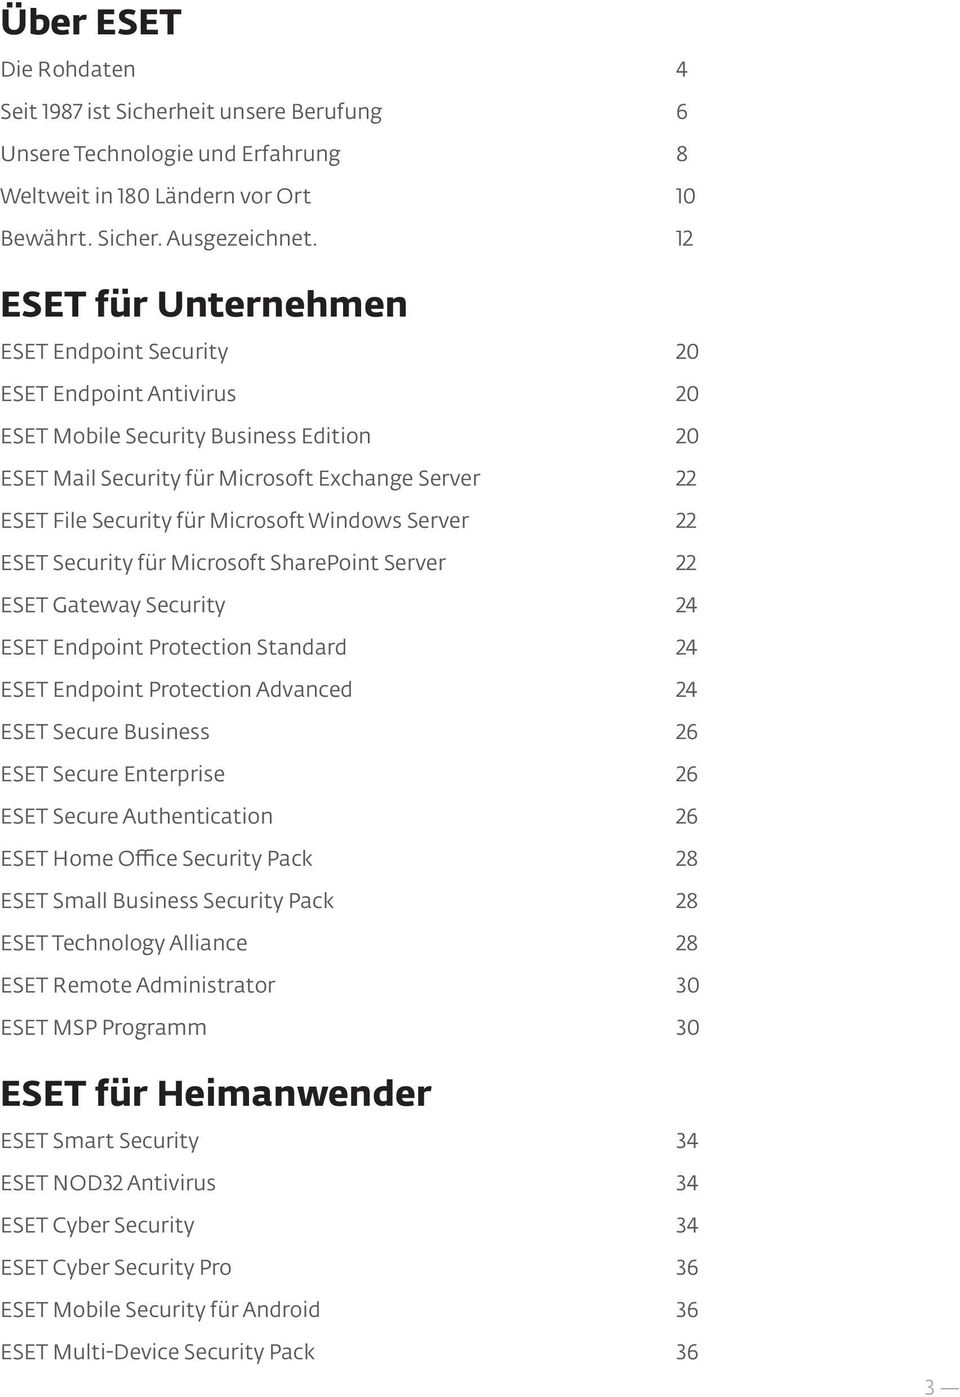 Microsoft Windows Server 22 ESET Security für Microsoft SharePoint Server 22 ESET Gateway Security 24 ESET Endpoint Protection Standard 24 ESET Endpoint Protection Advanced 24 ESET Secure Business 26